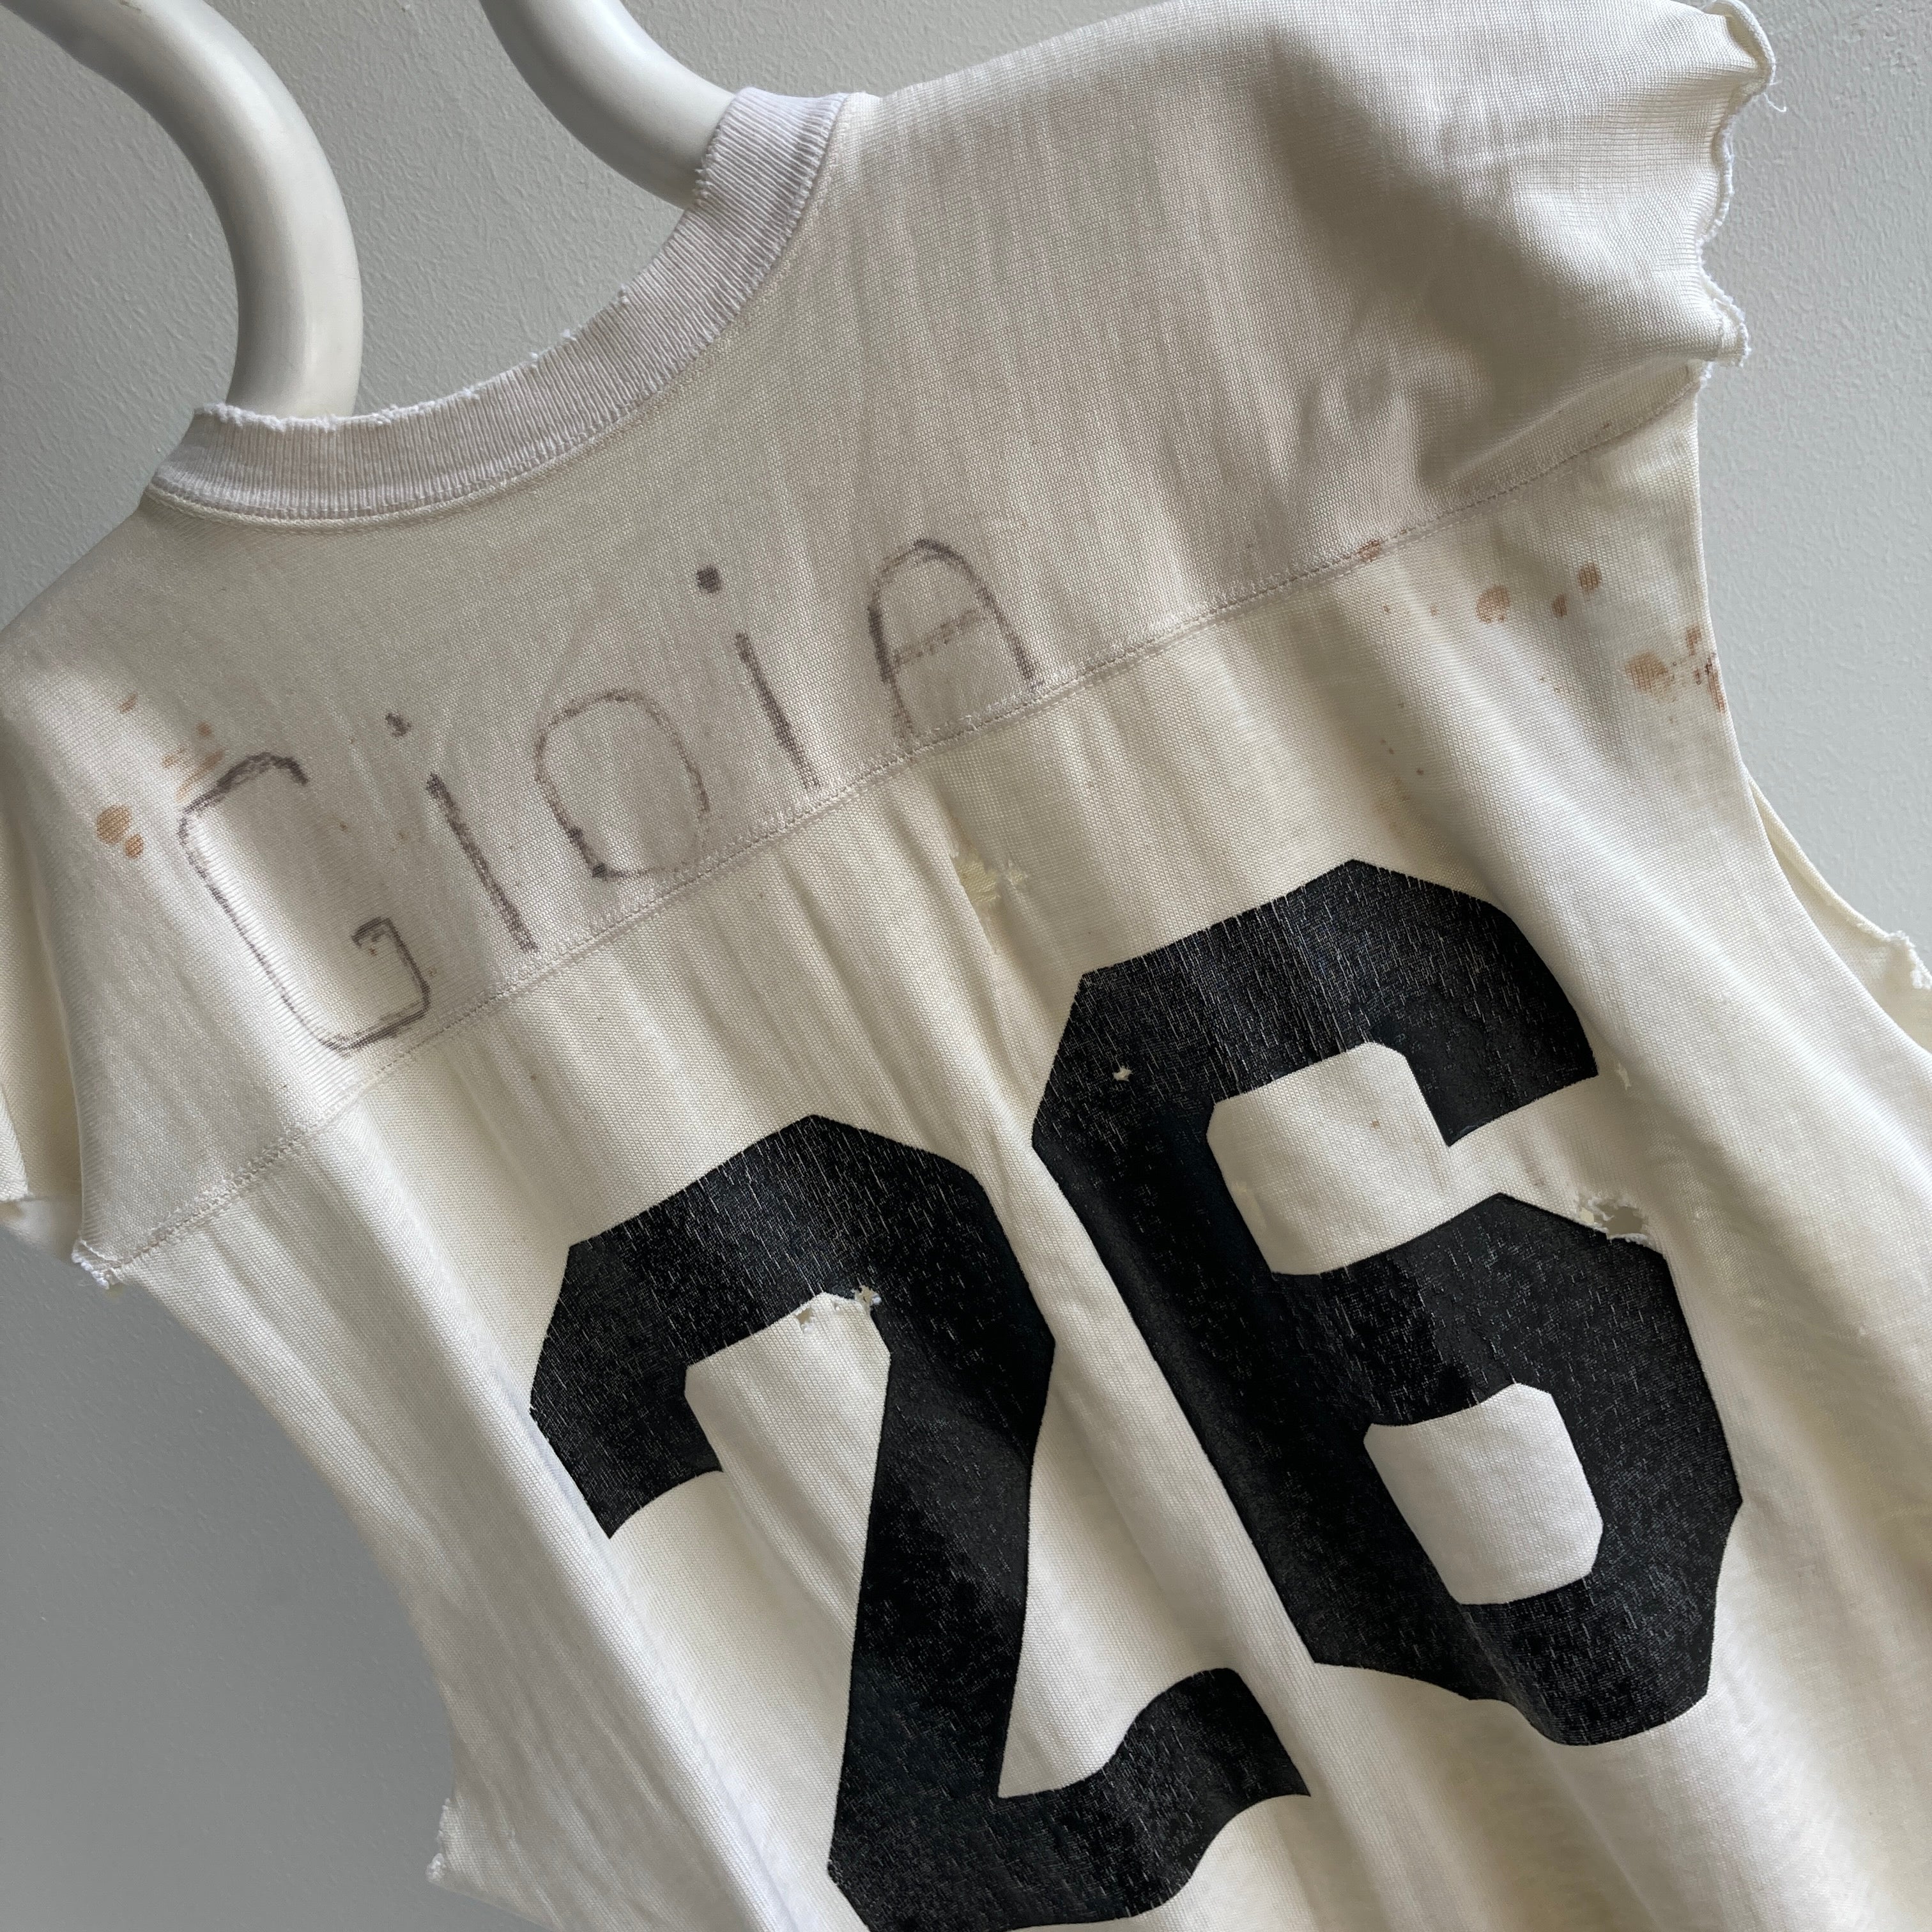 70's Beat Up Stained + Cut Football Jersey With #26 And A Sharpied Name 